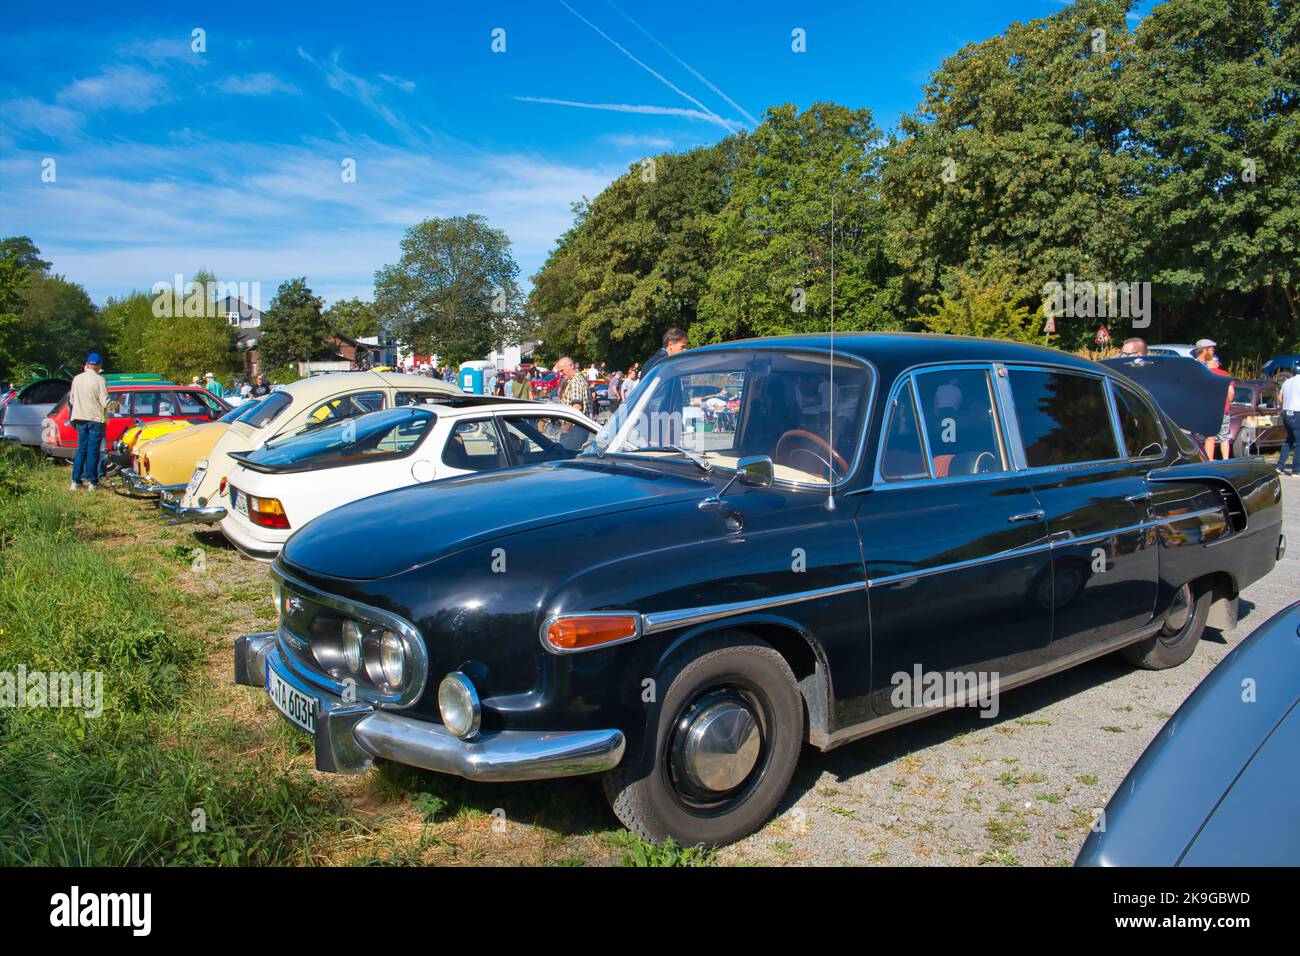 Tatra 603, produced from 1956 - 1975, V8 engine, side front view Stock Photo